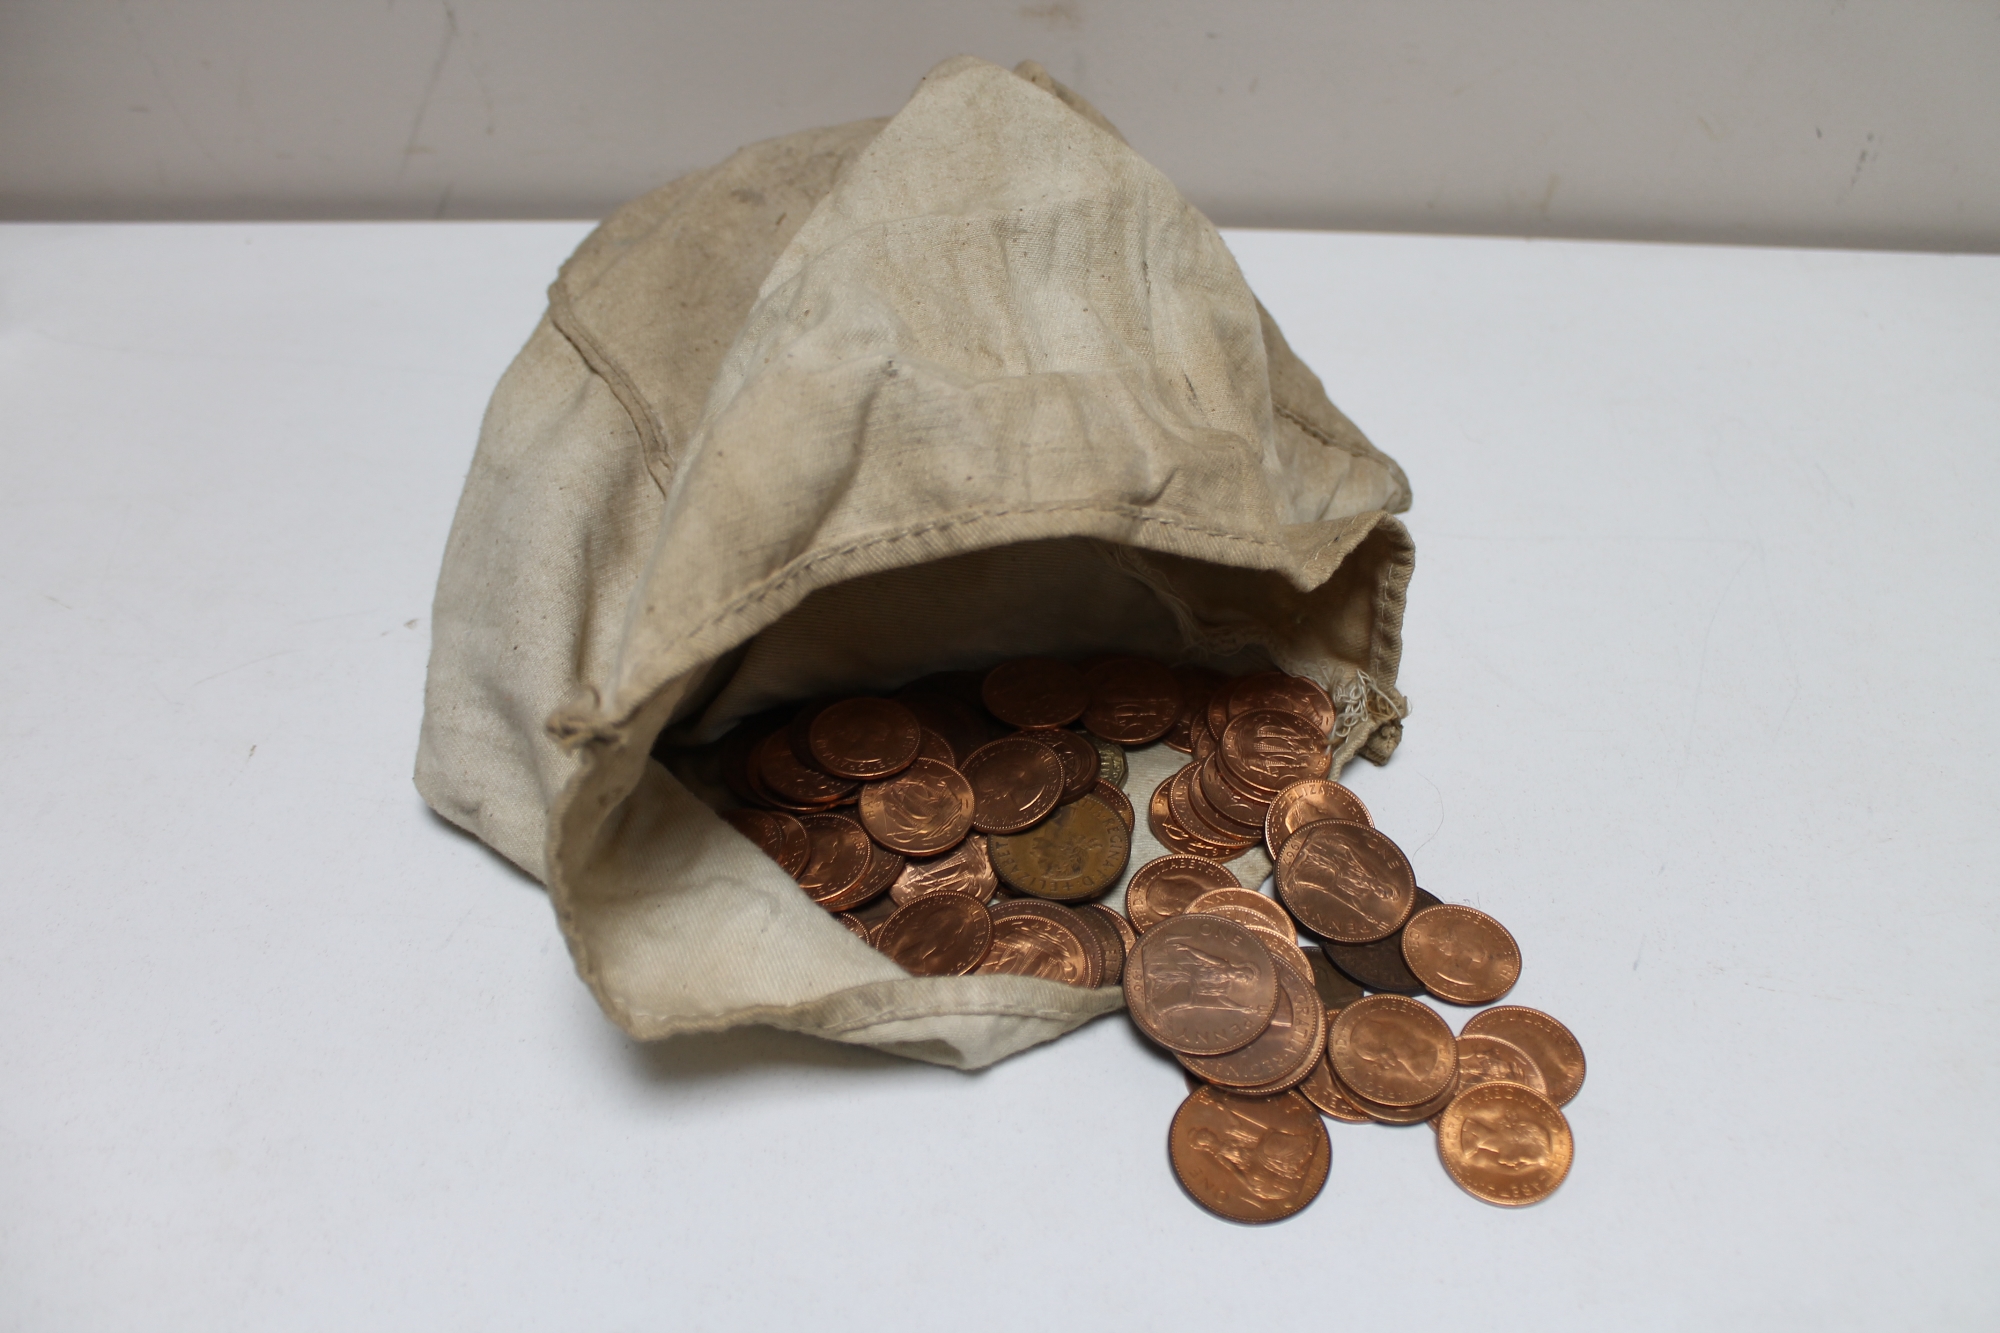 A bag of mid century pennies and half pennies